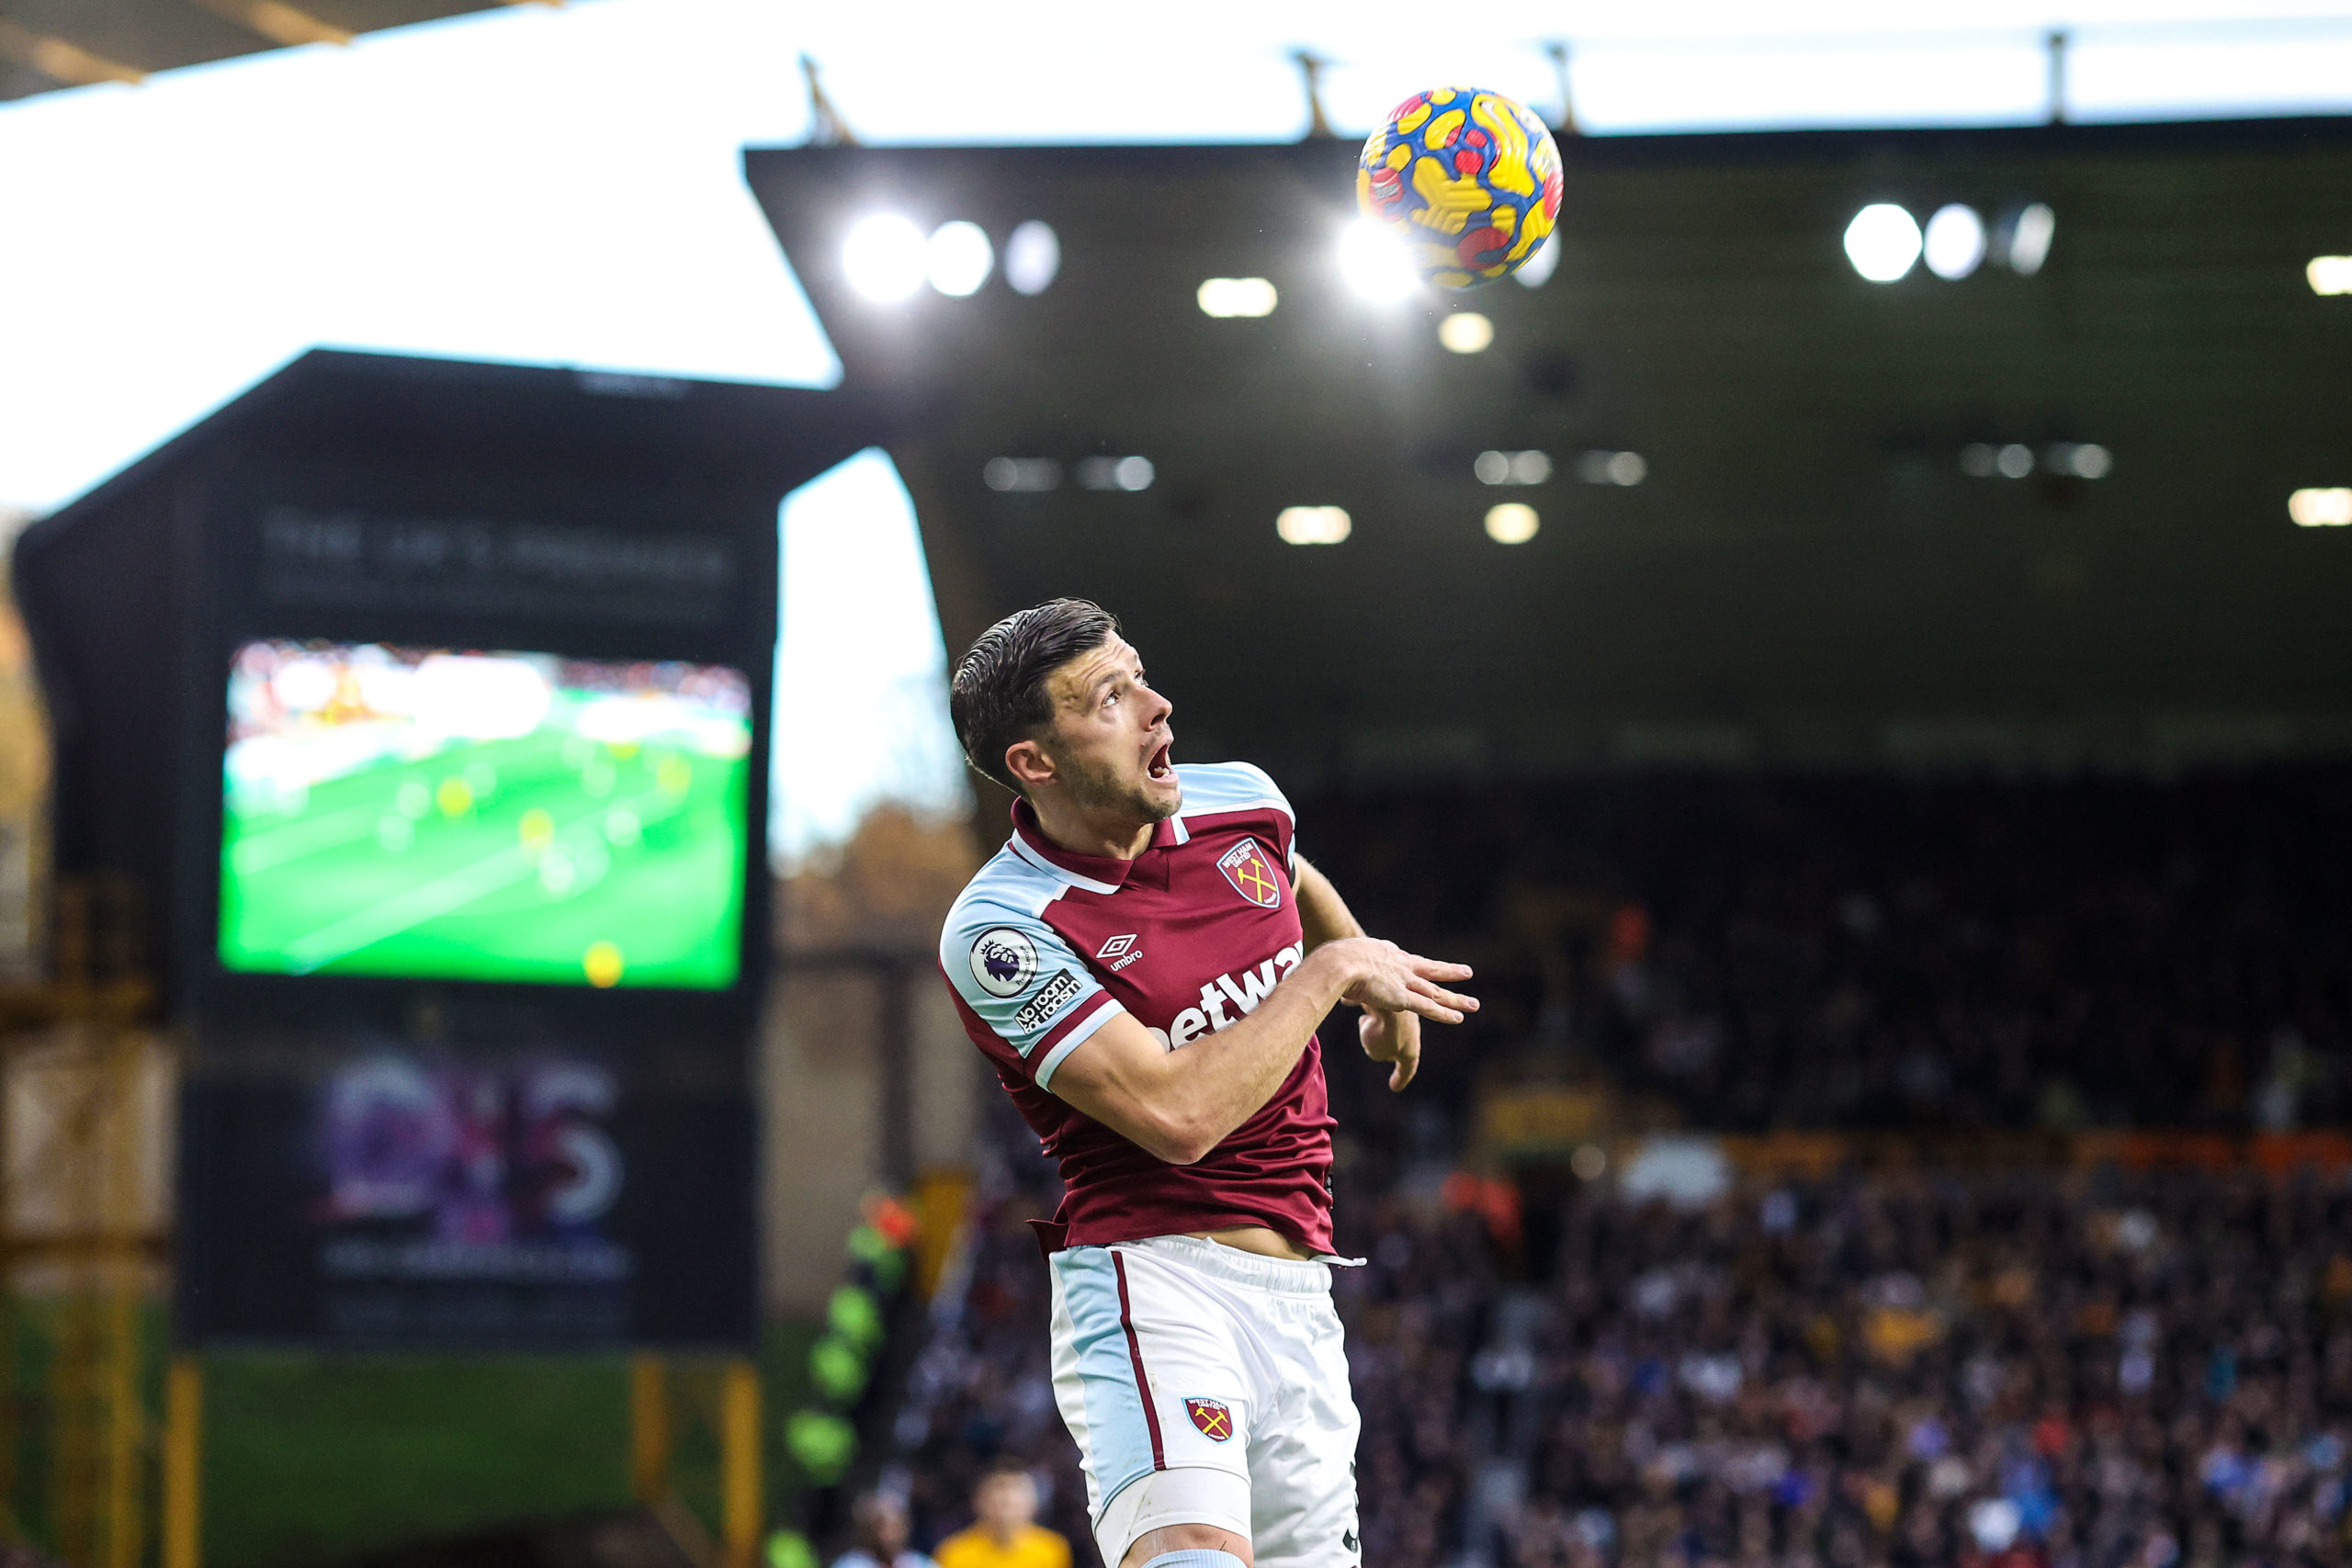 West Ham fans have raved about the performance of Aaron Cresswell against Norwich City